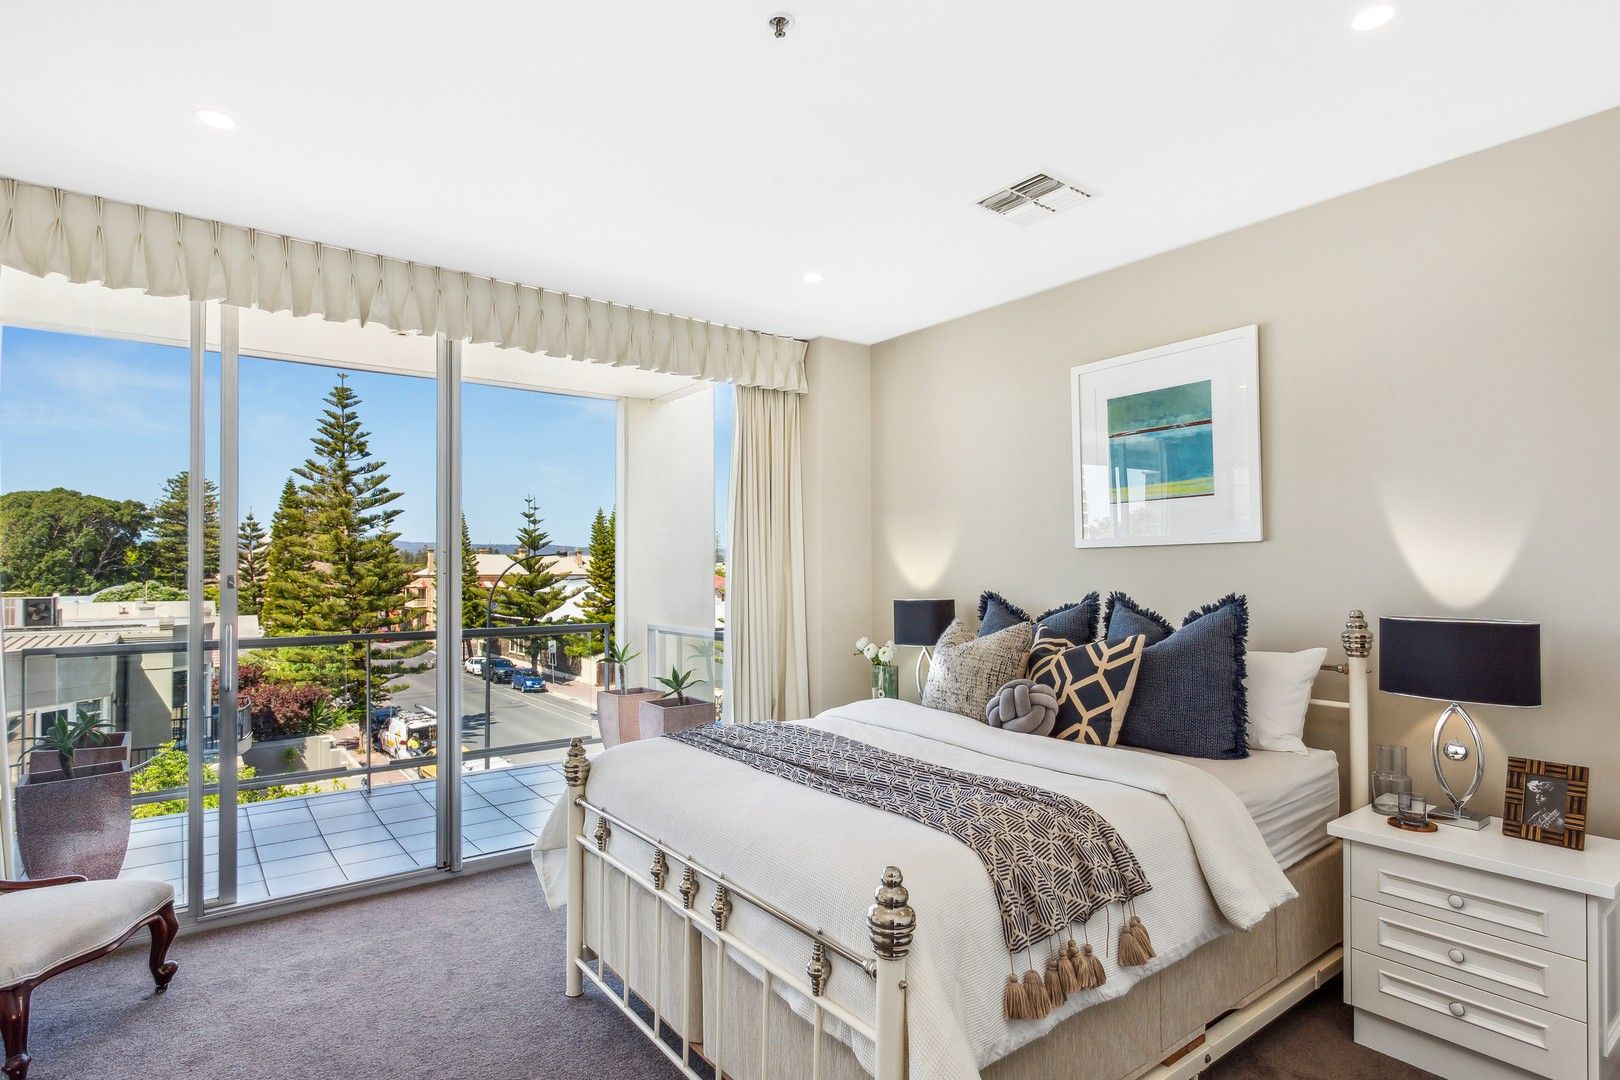 1 bedrooms Apartment / Unit / Flat in 10/18 Colley Terrace GLENELG SA, 5045